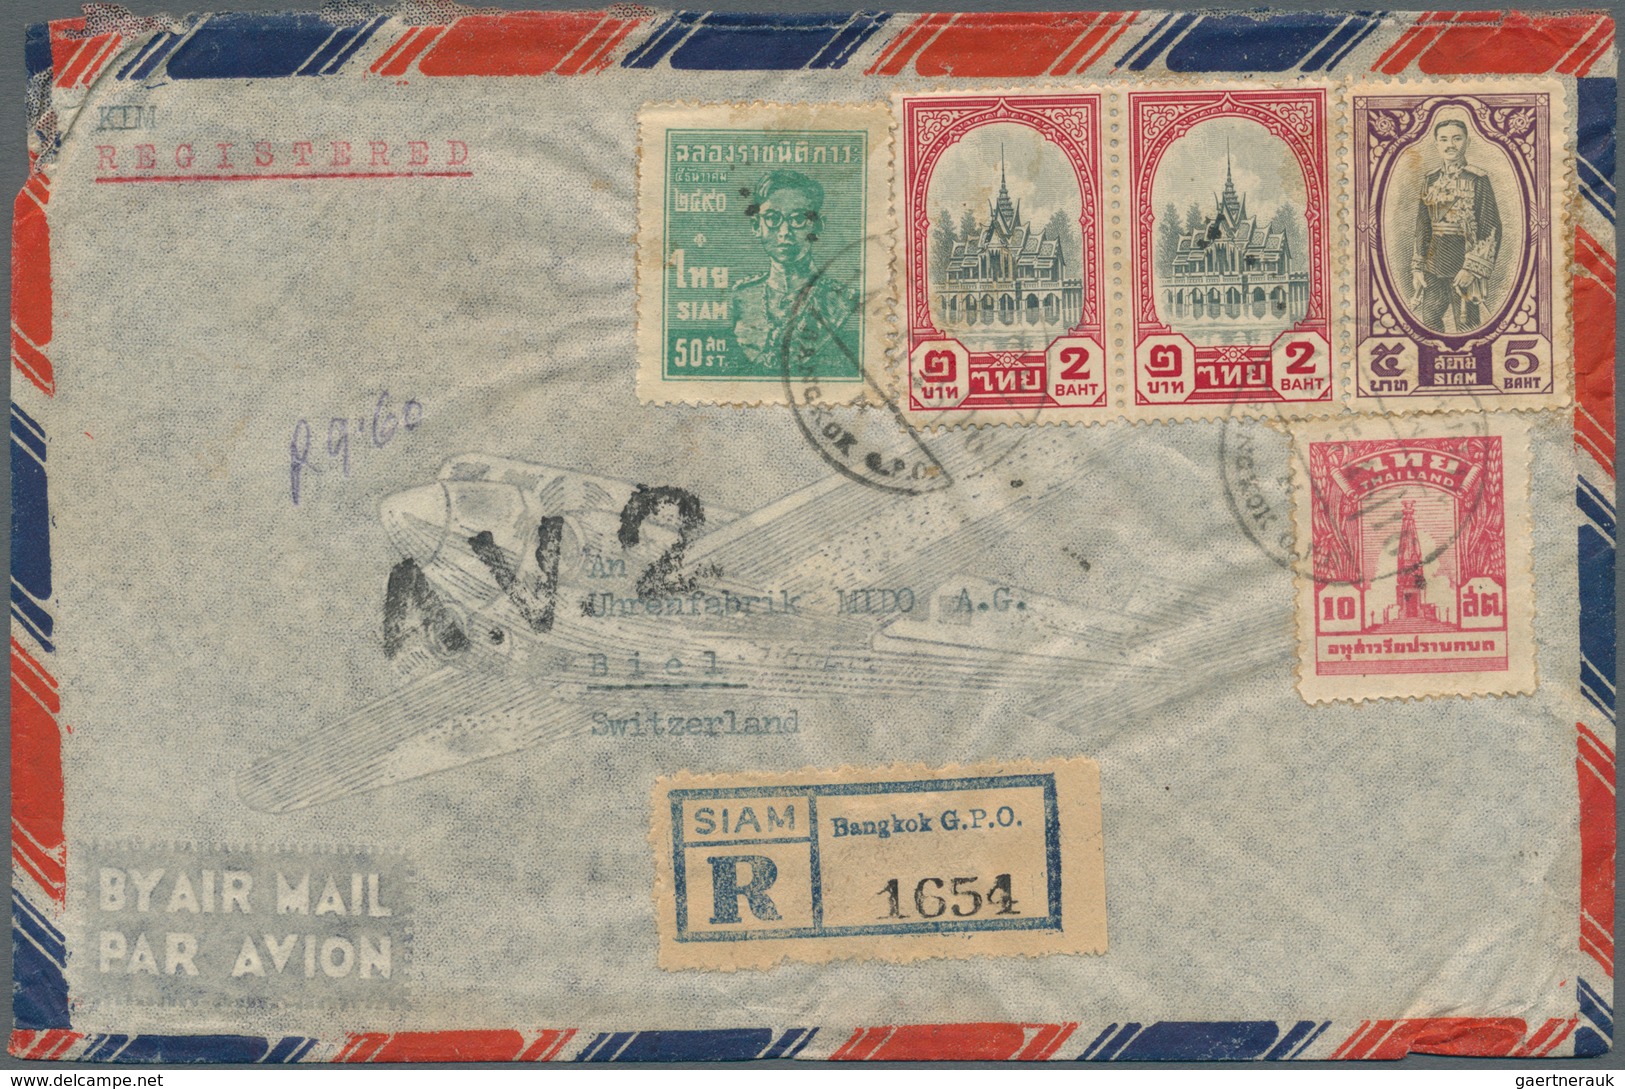 24235 Thailand: 1893/1973: Very fine lot of 61 envelopes, used picture postcards and postal stationeries w